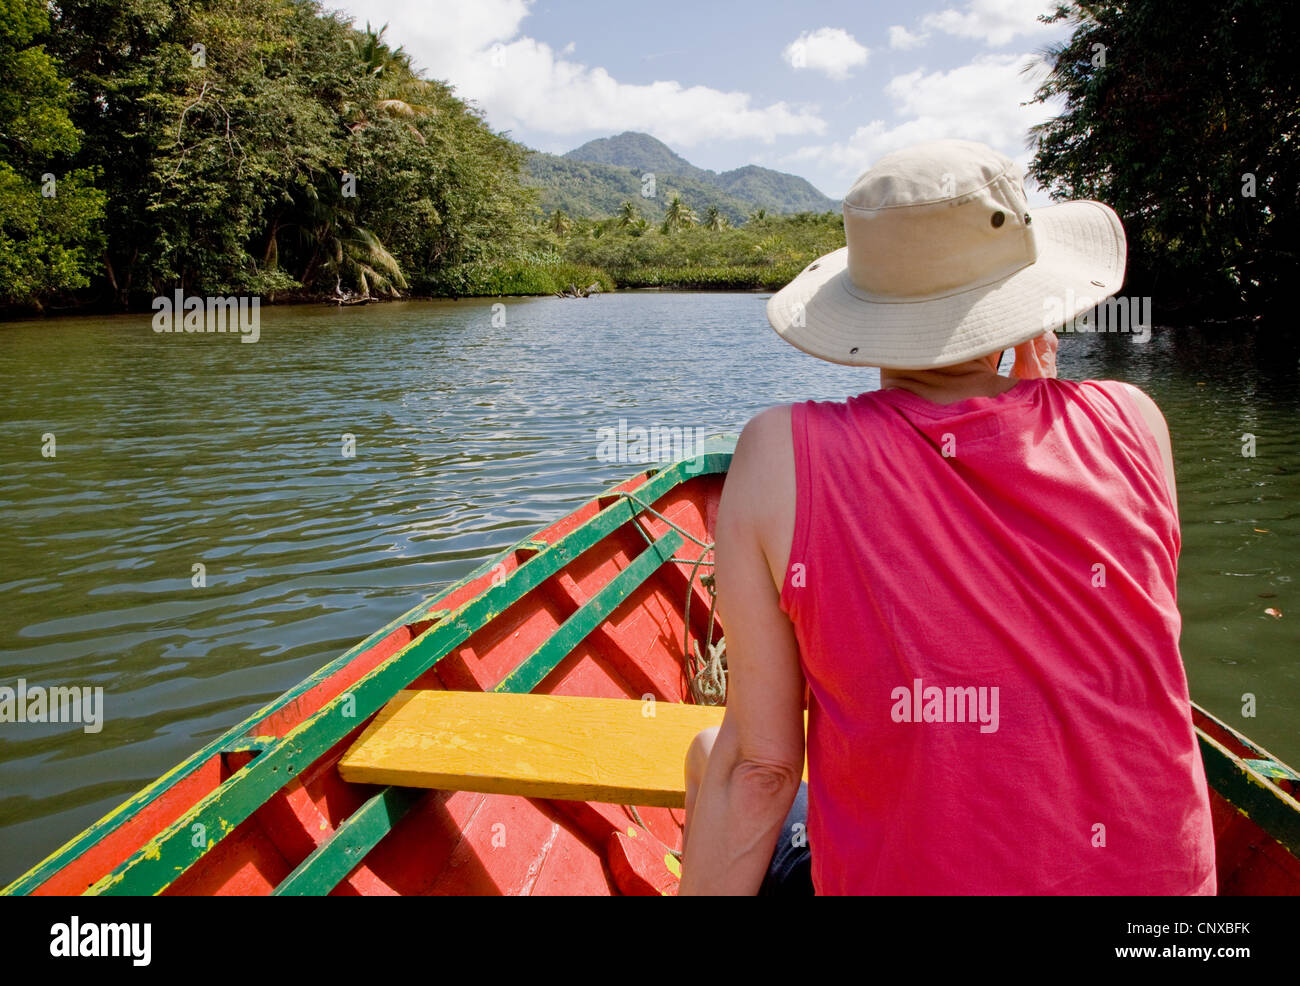 A woman passenger enjoys the view as she is rowed up the Indian River in Dominica Stock Photo